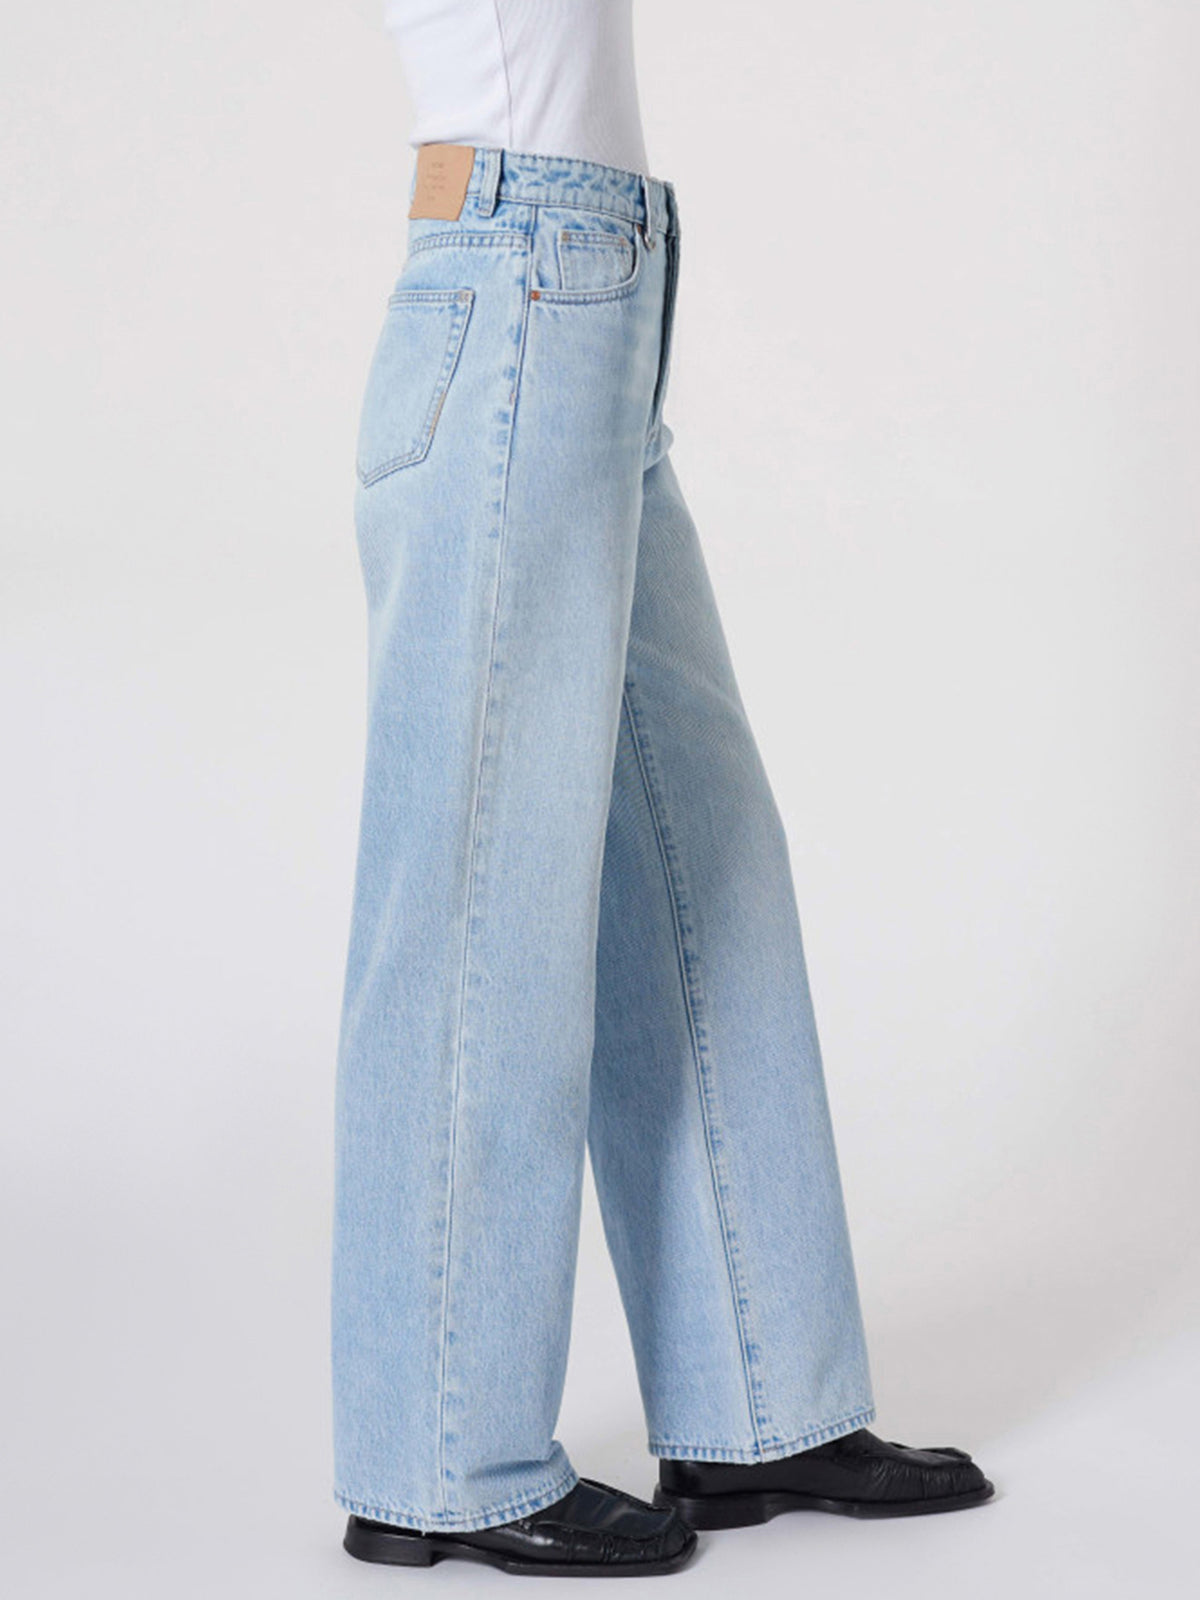 Coco Relaxed Jeans in Jetlag Light Vintage Indigo